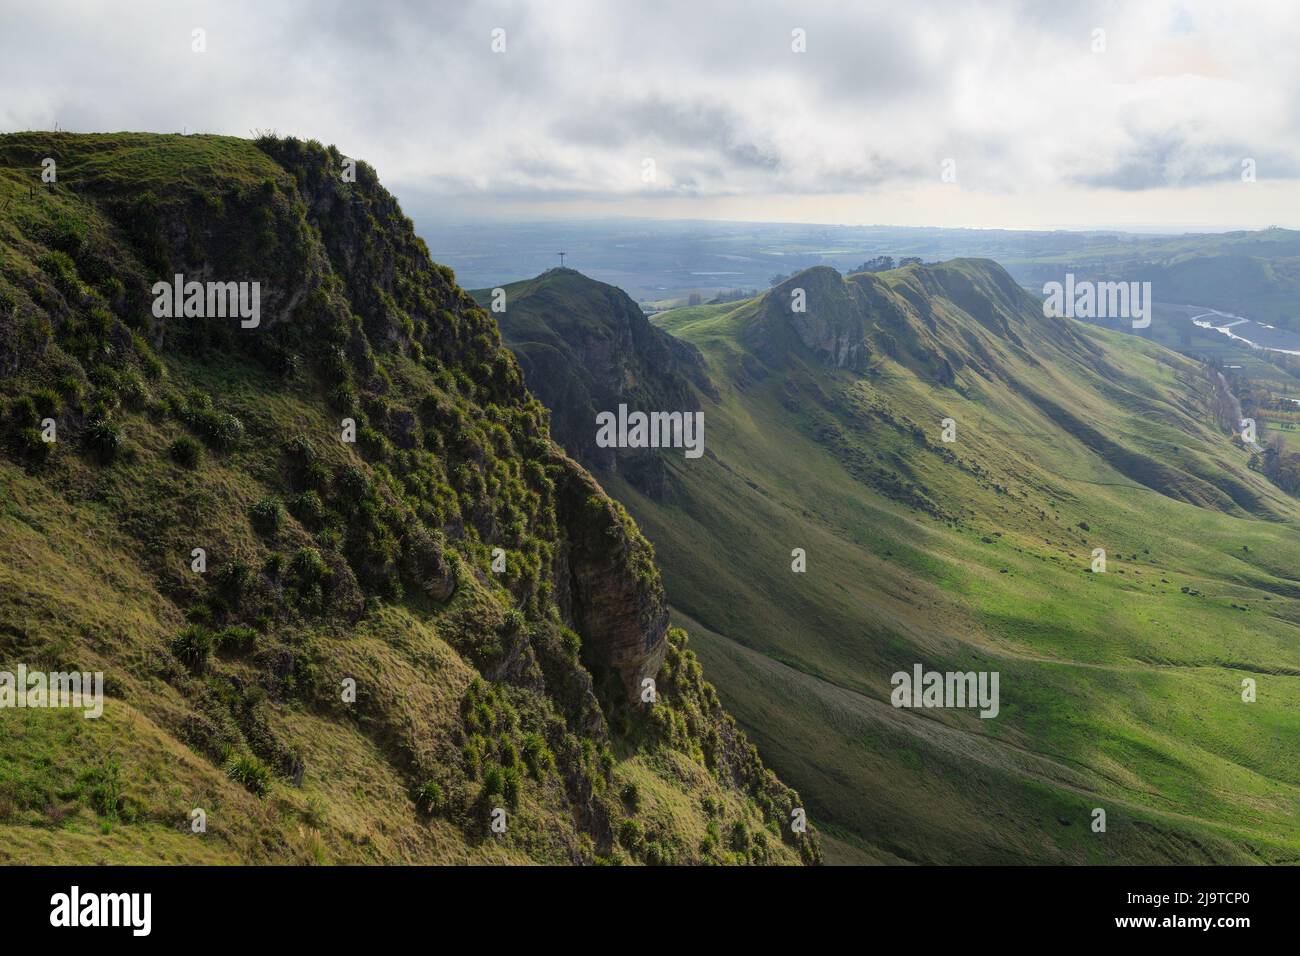 The view from Te Mata Peak, a mountain in the Hawke's Bay region, New Zealand. To the right the land slopes down to the Tukituki River Stock Photo